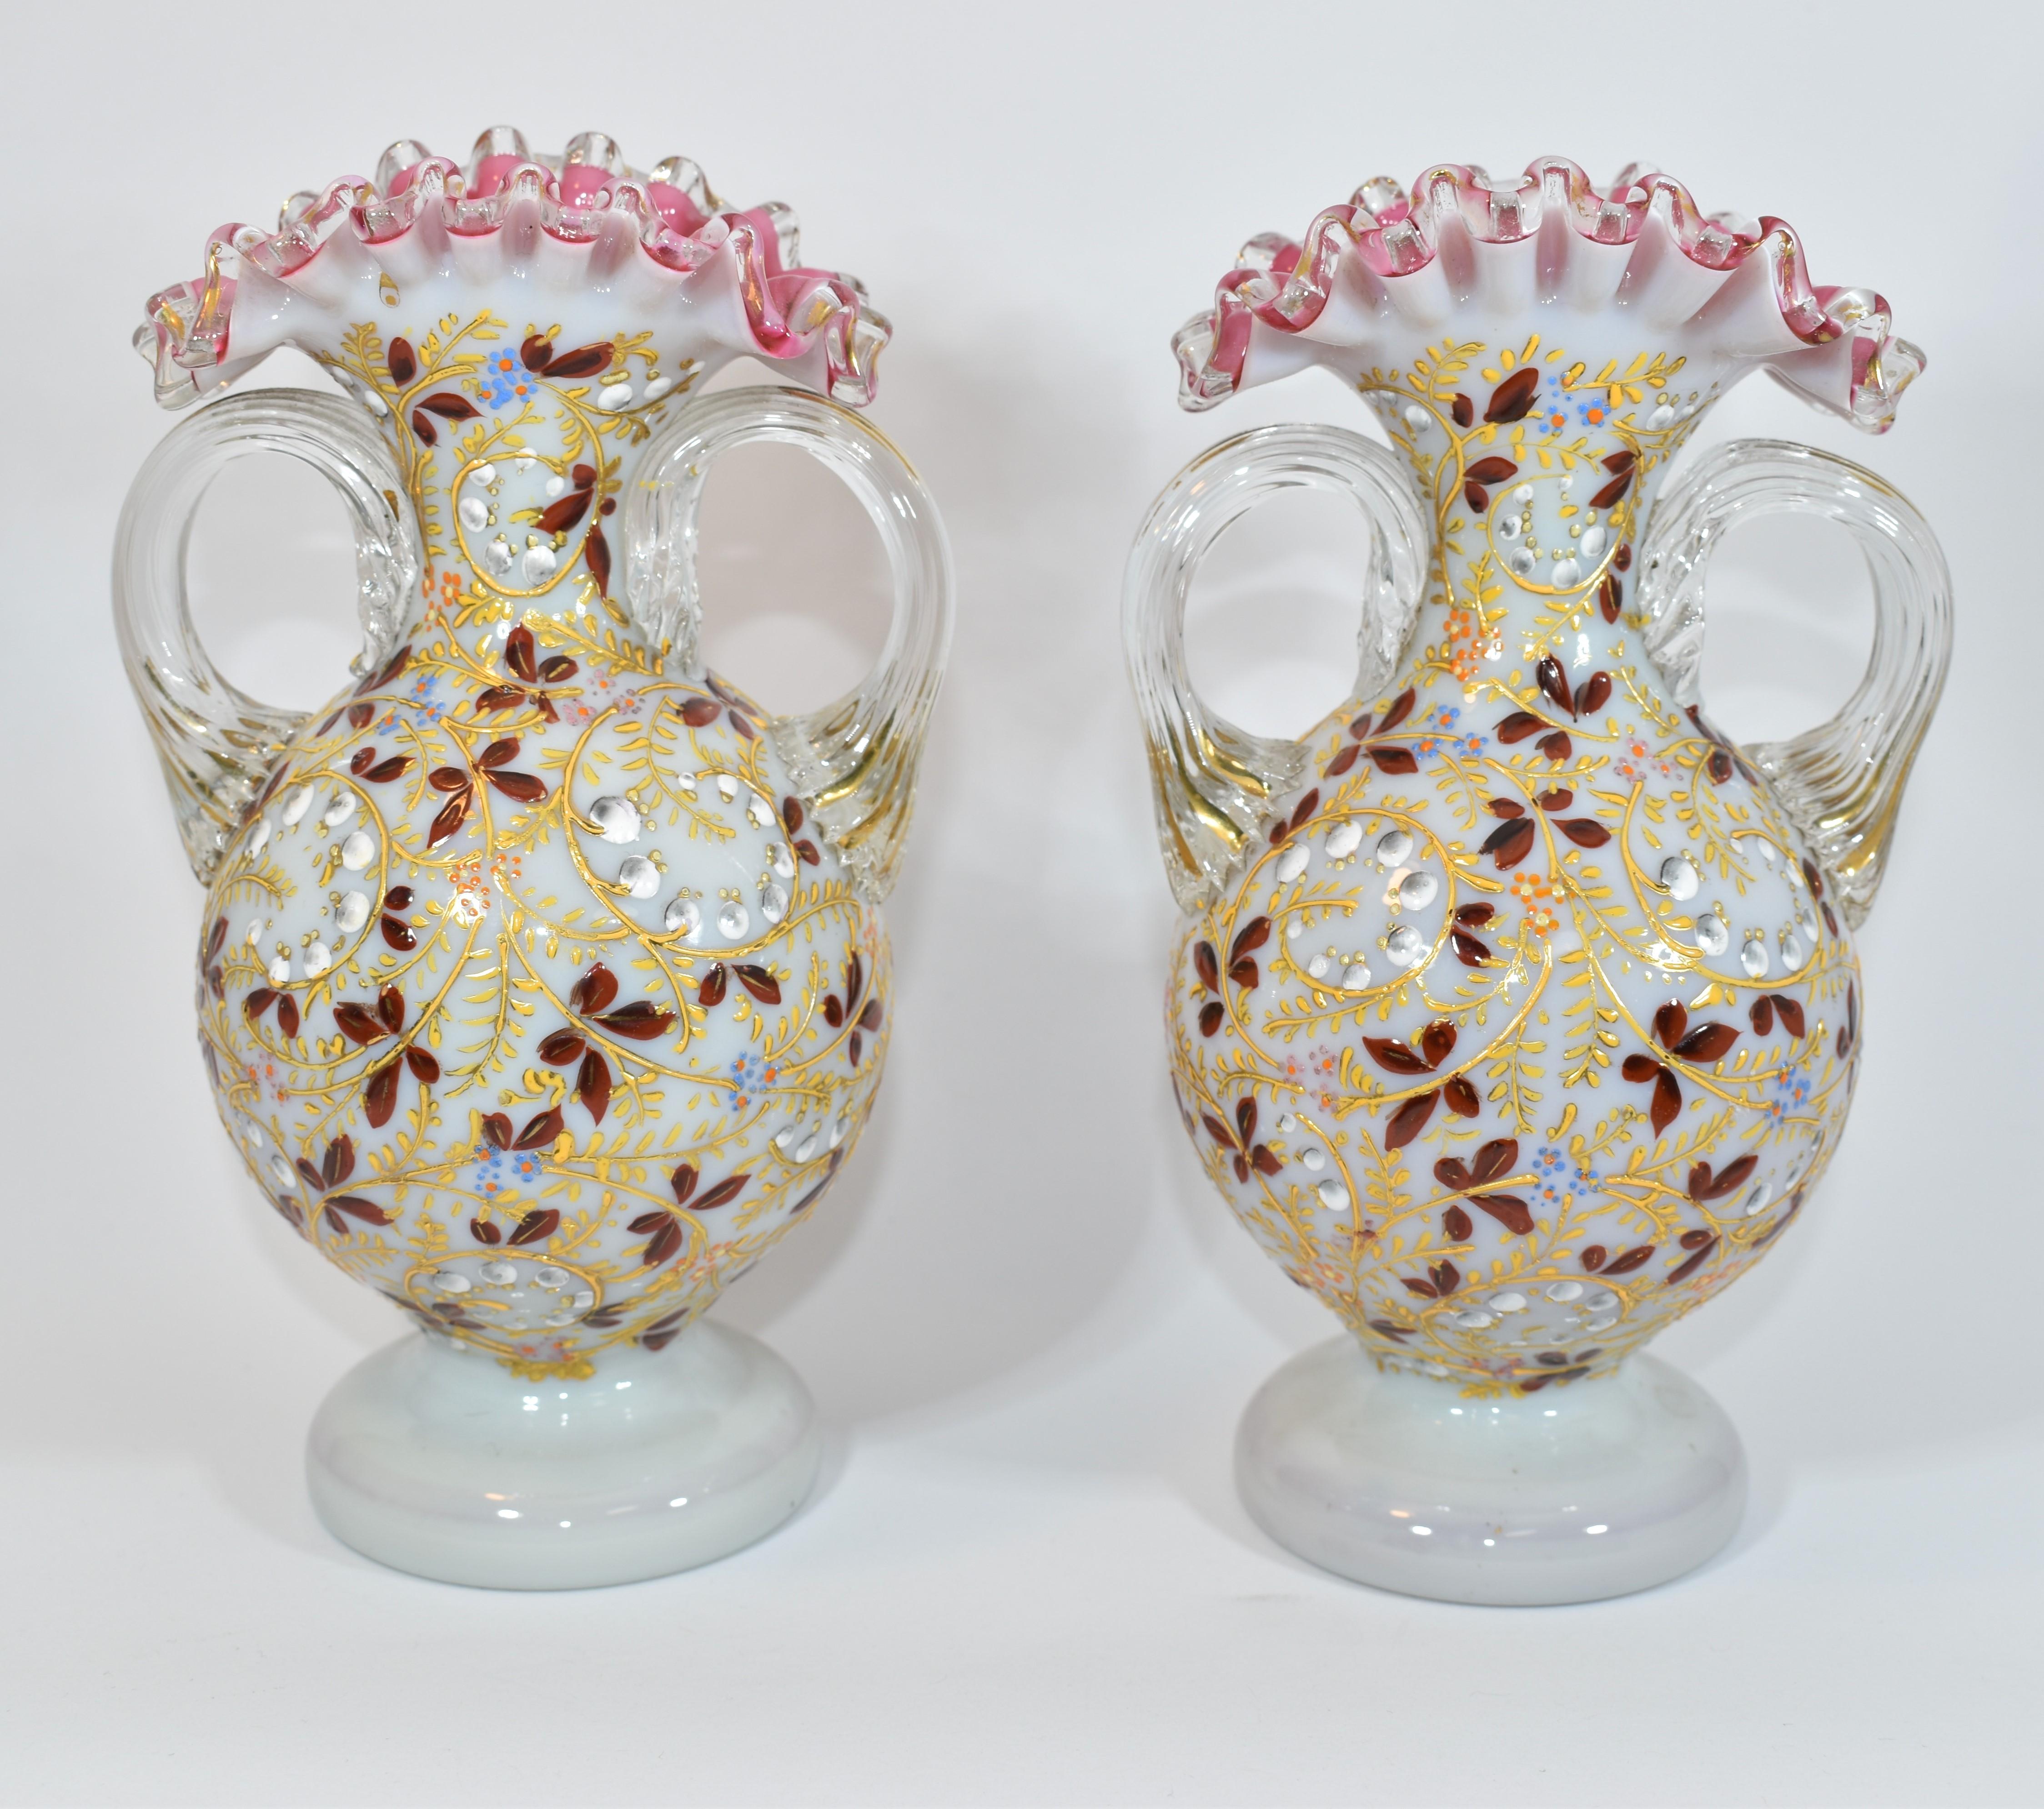 Pair of flared vases with handles
made of two-tone opal glass, pink and milky white
stunning wavy edges
hand-painted all around with colorful enamel
Bohemia, Moser, late 19th century.